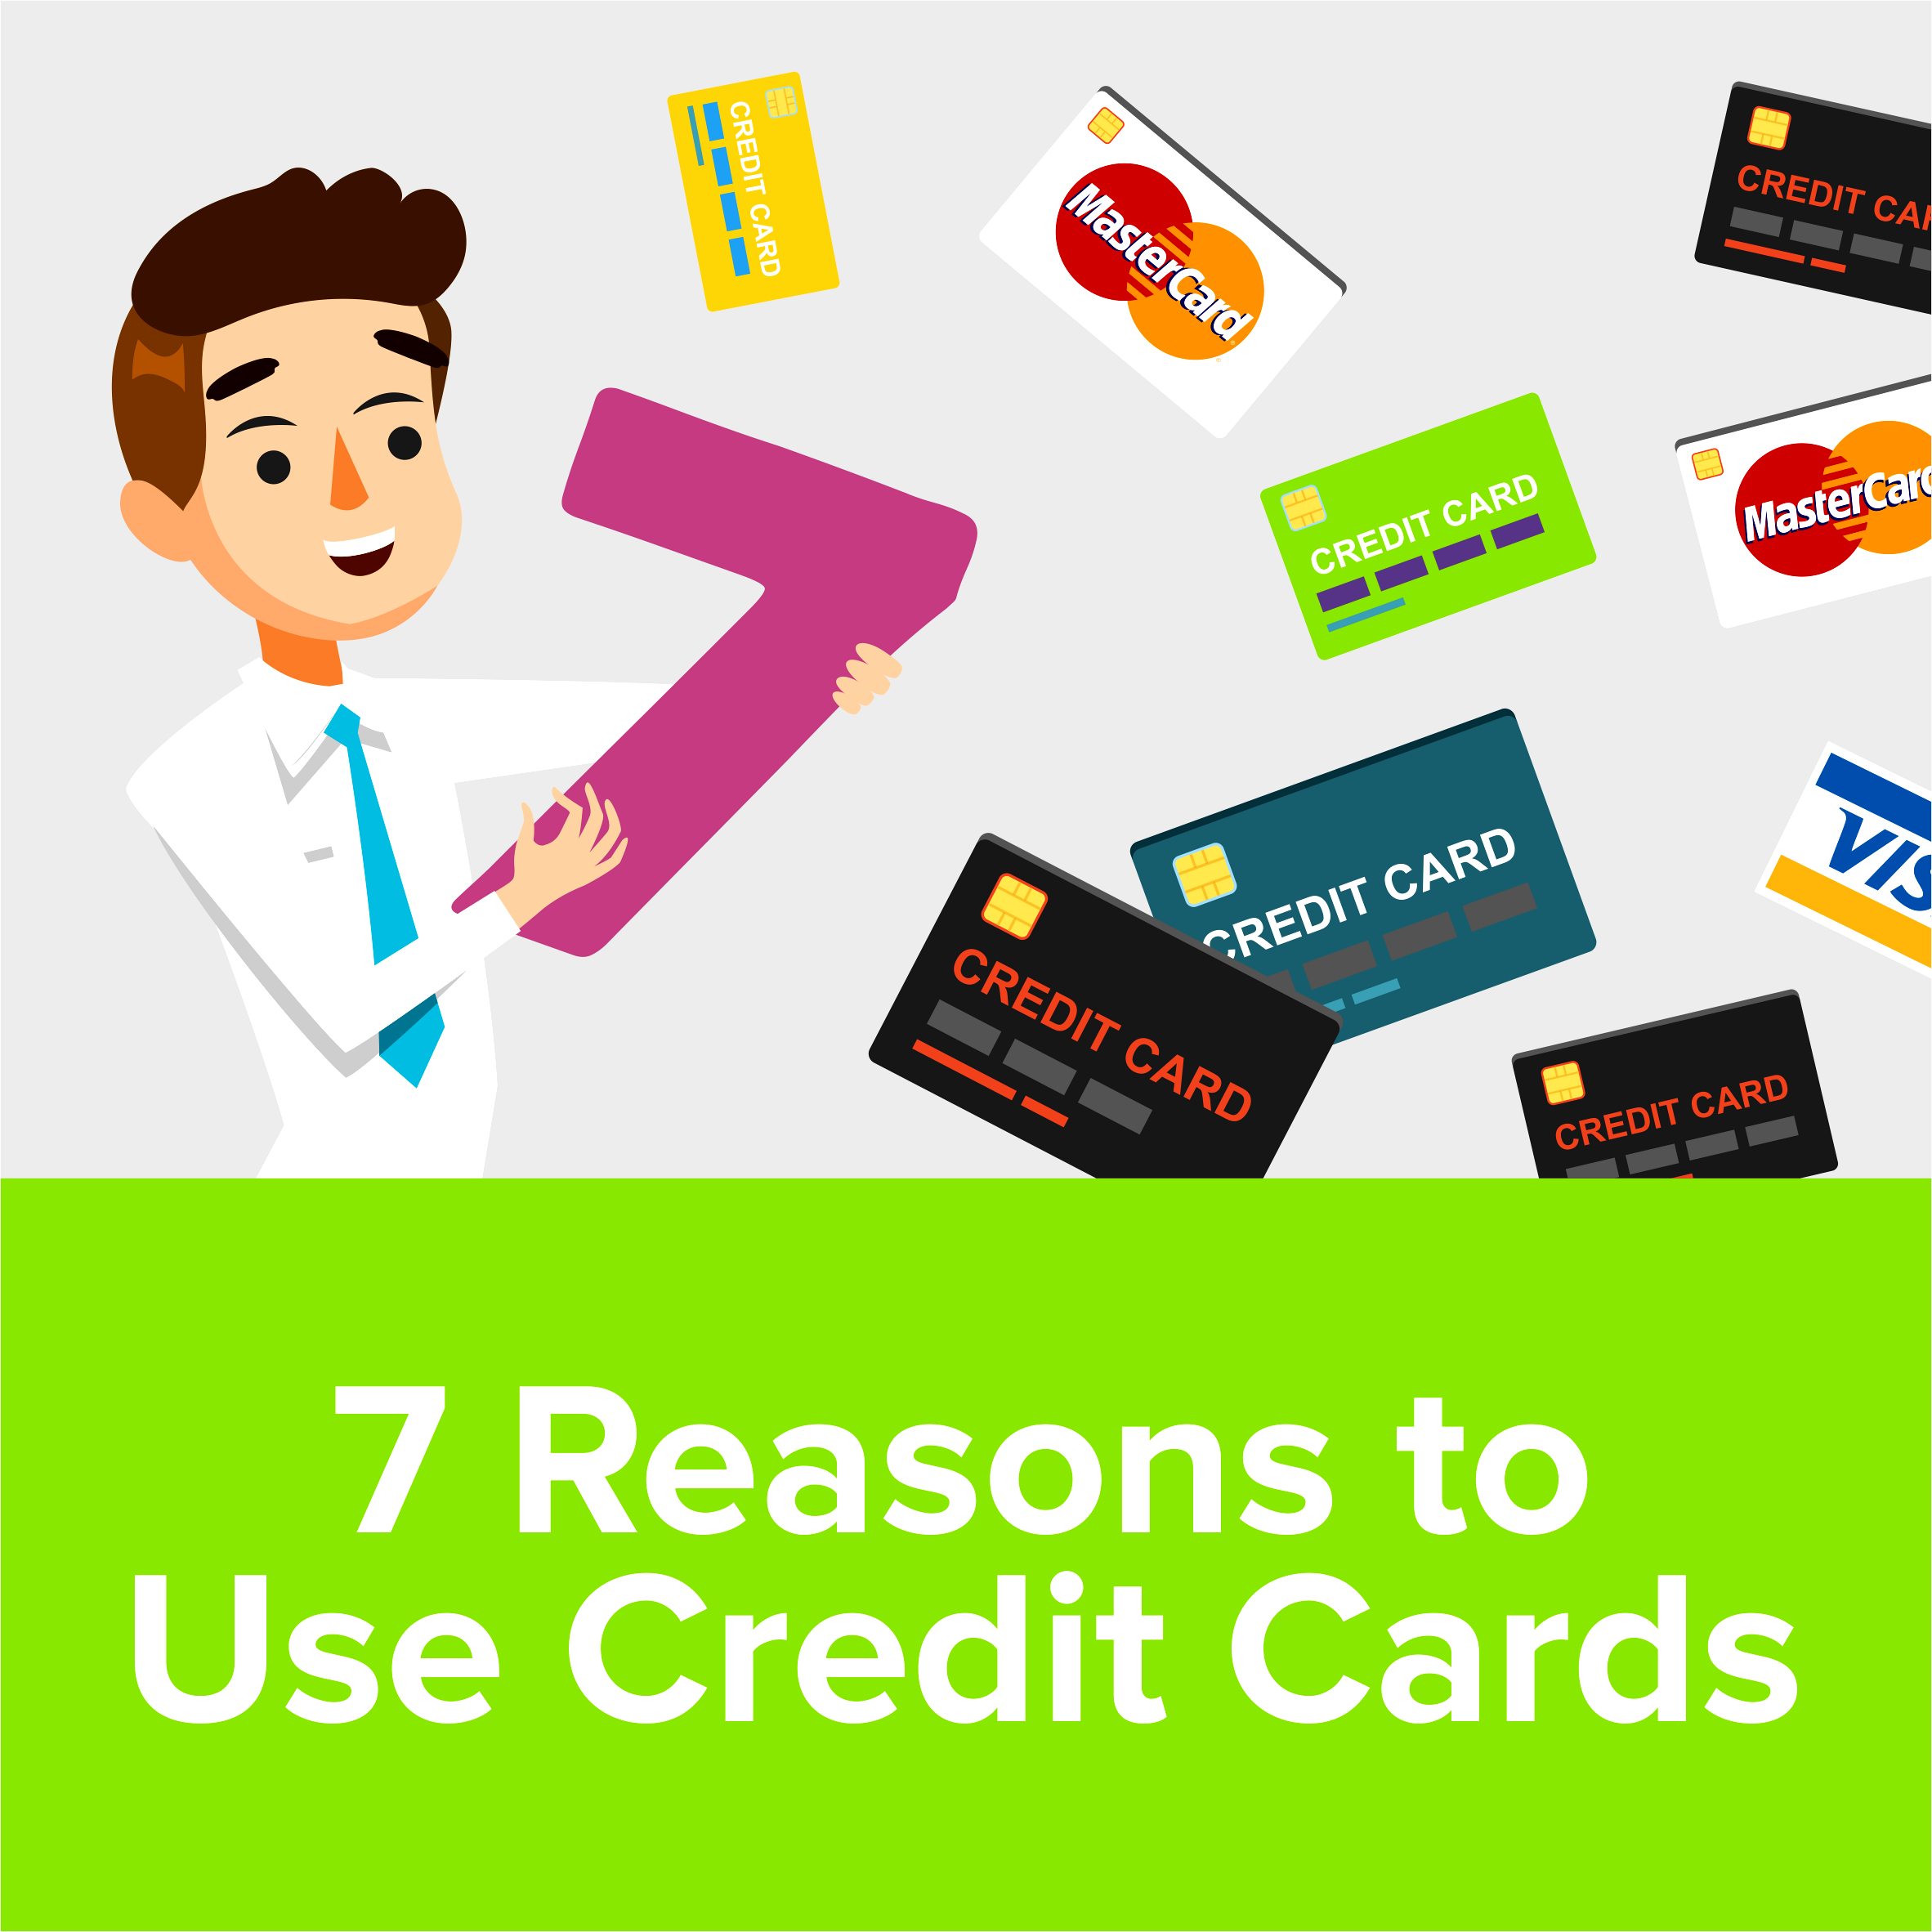 7 Reasons to Use Credit Cards